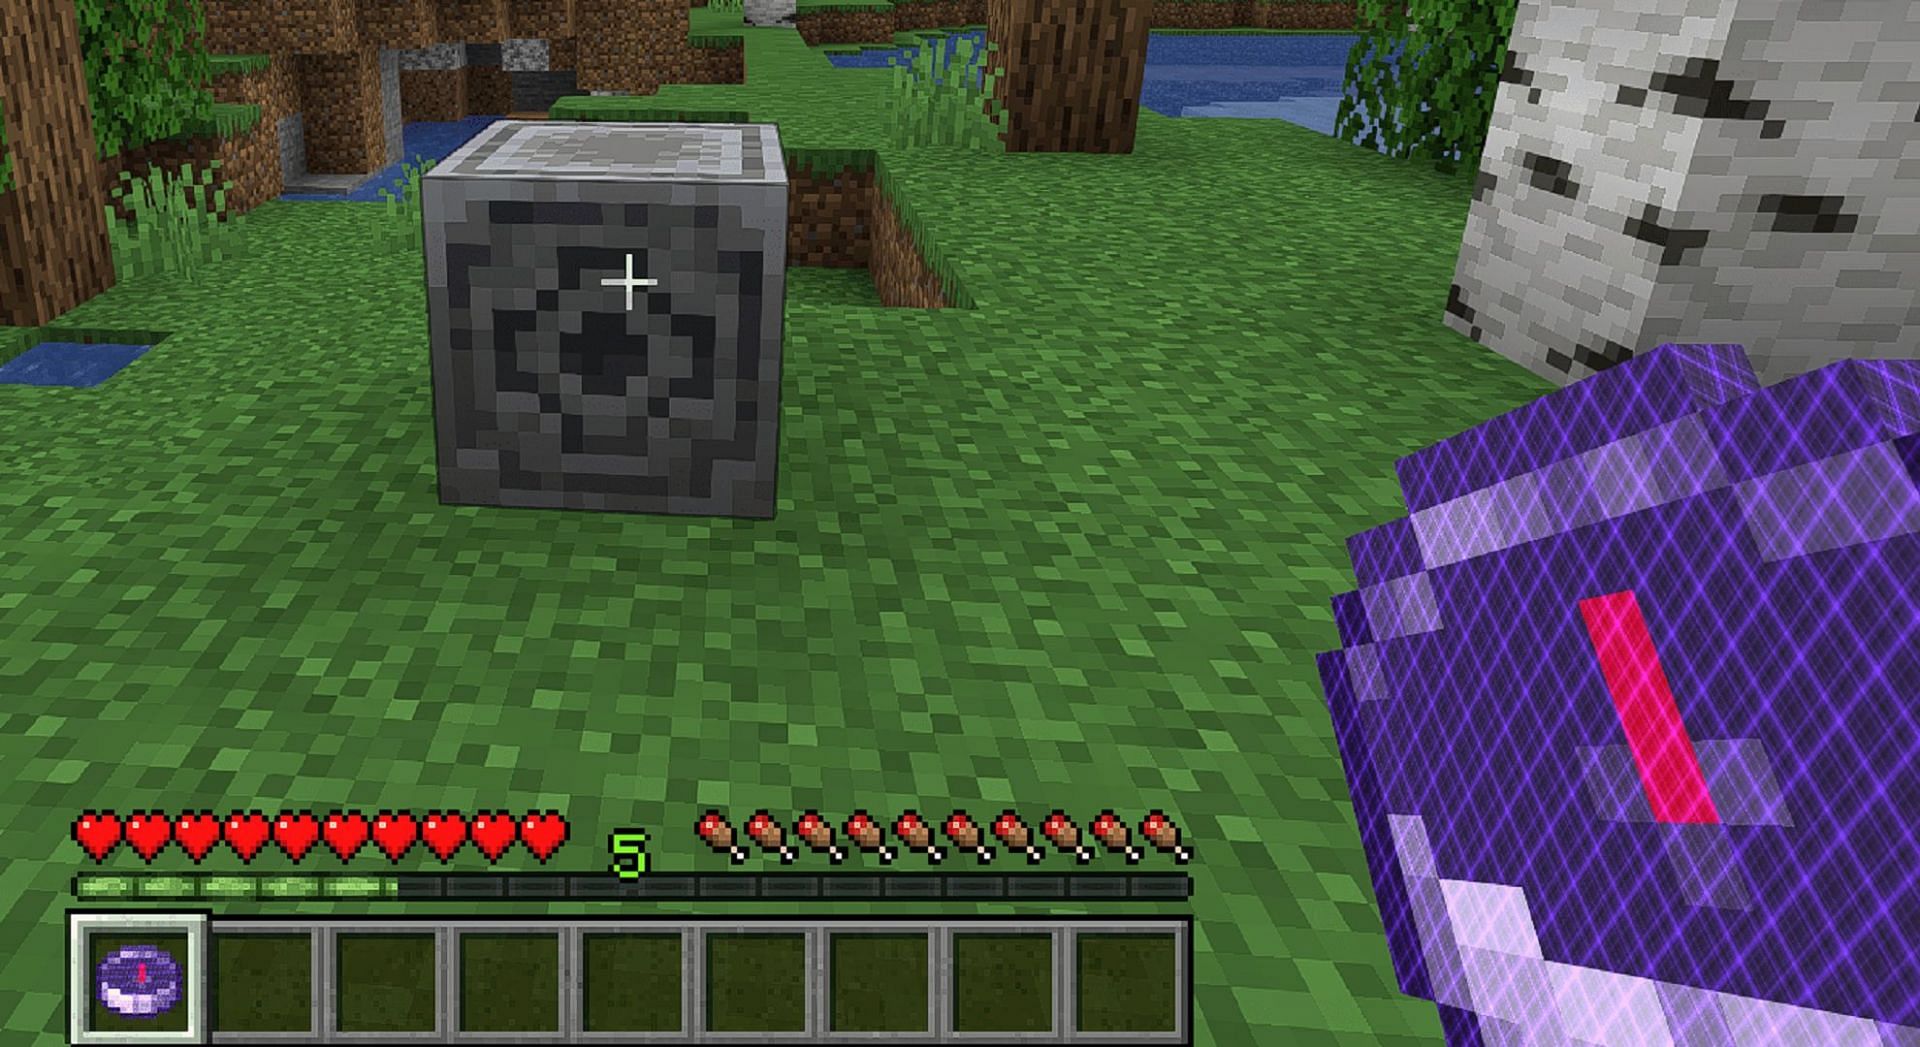 With a lodestone, Minecraft players can bond a compass to the block (Image via Mojang)